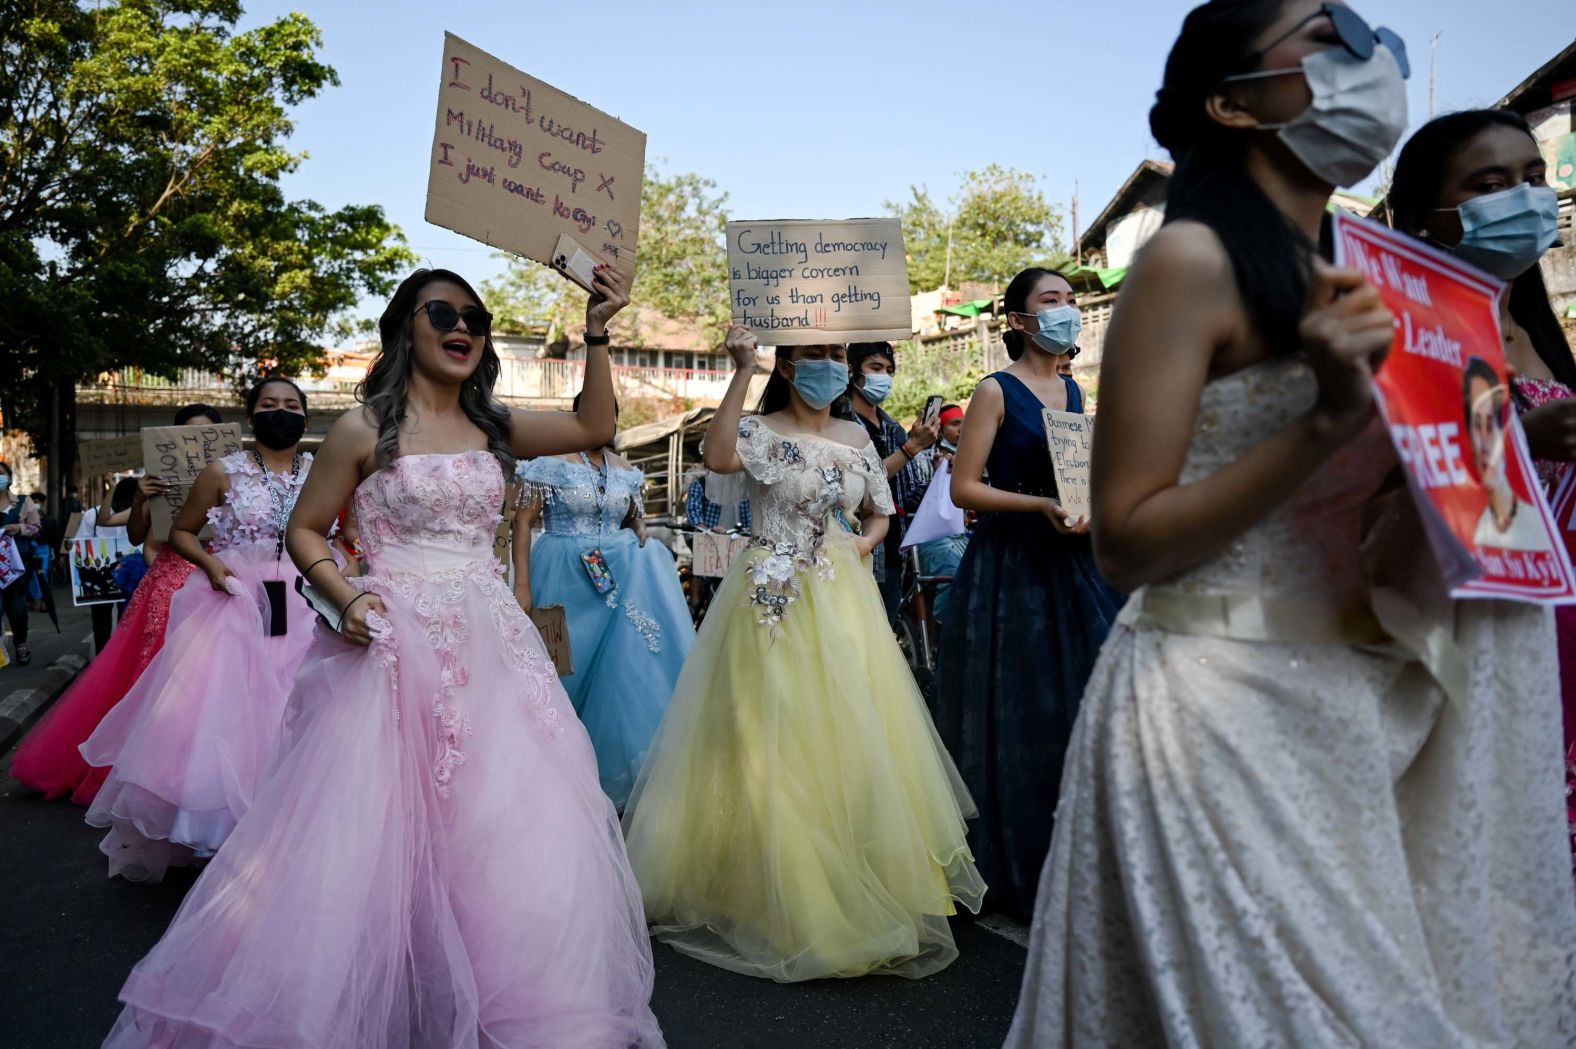 Women in wedding gowns holds up anti-coup placards in Yangon on February 10.